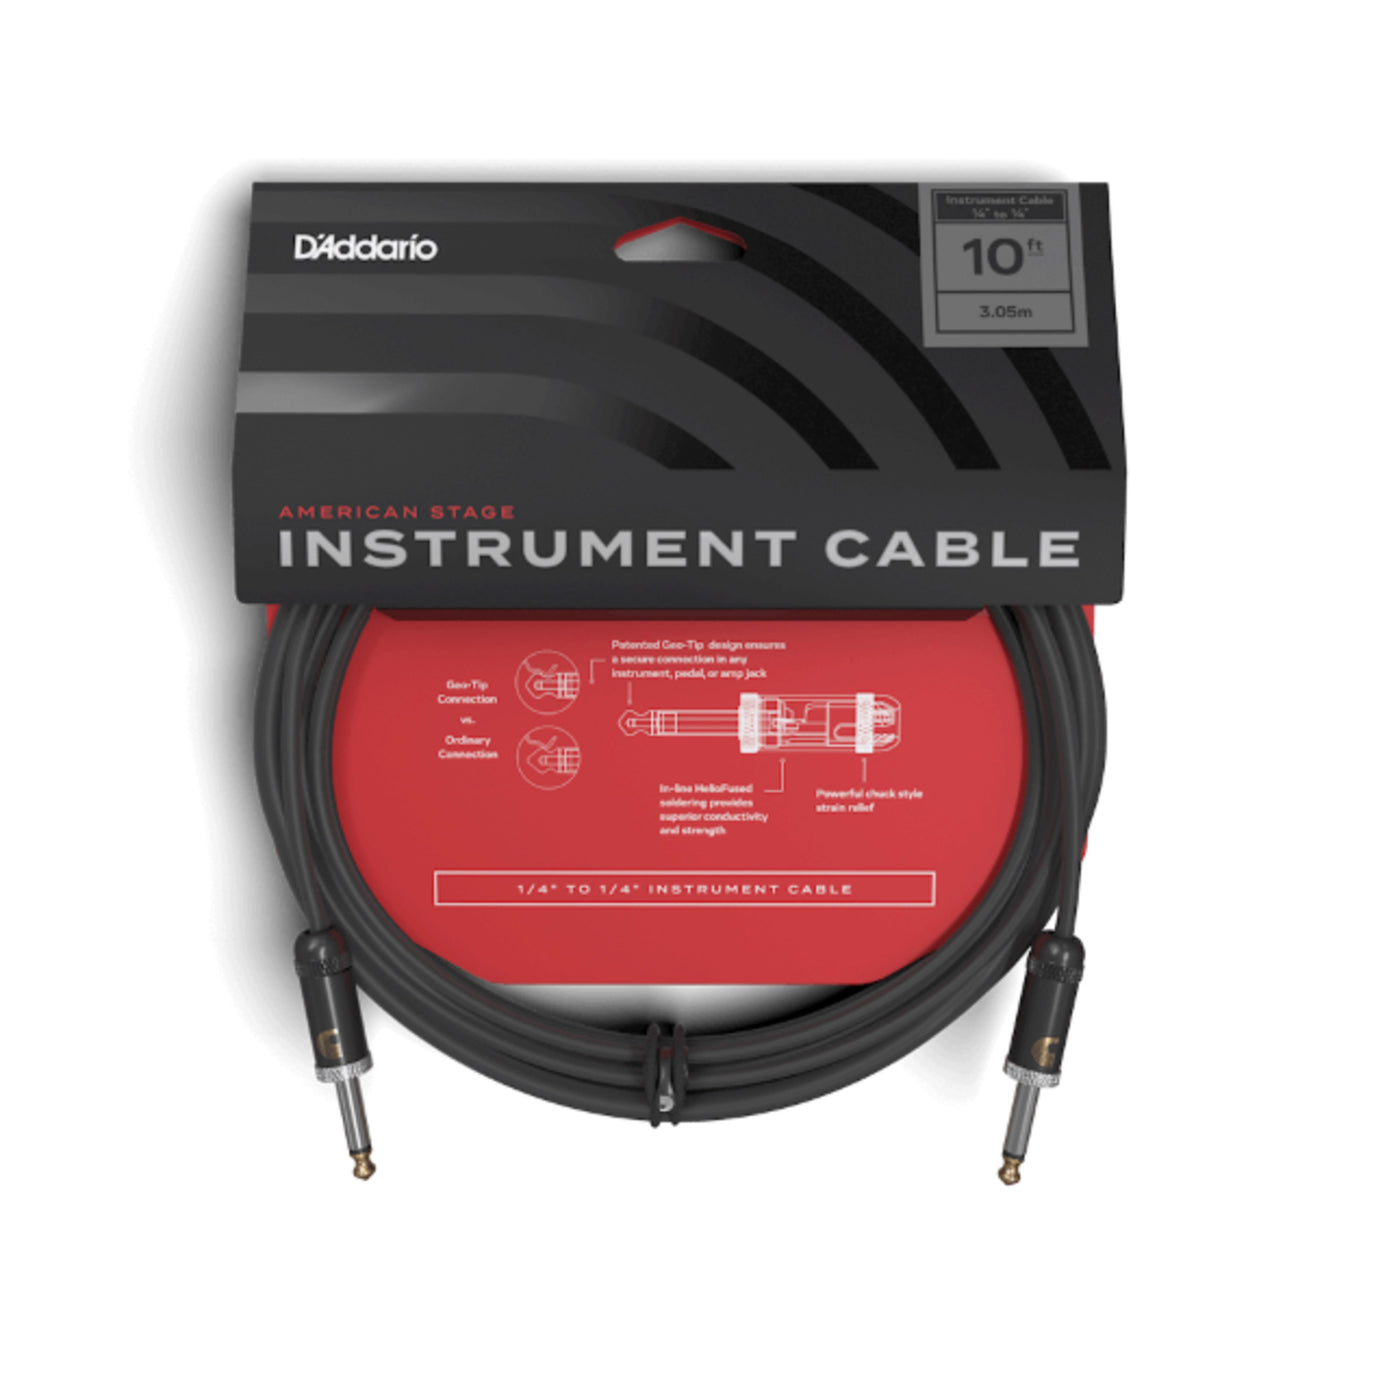 D'Addario American Stage Instrument Cable, 10 feet (PW-AMSG-10)